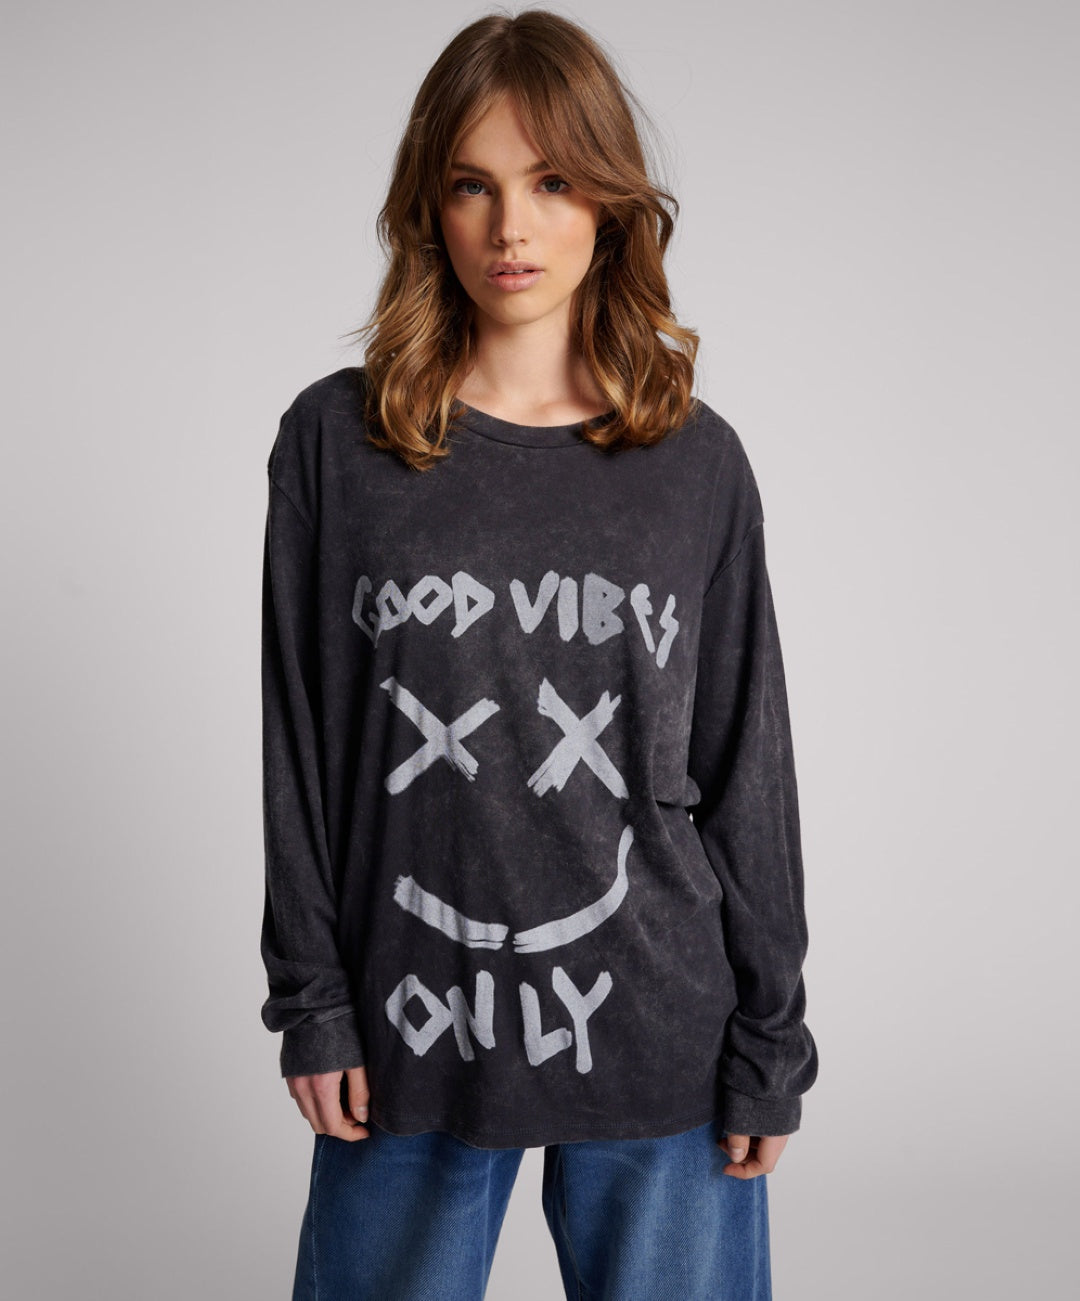 Good Vibes Only Long Sleeve Tee by One Teaspoon